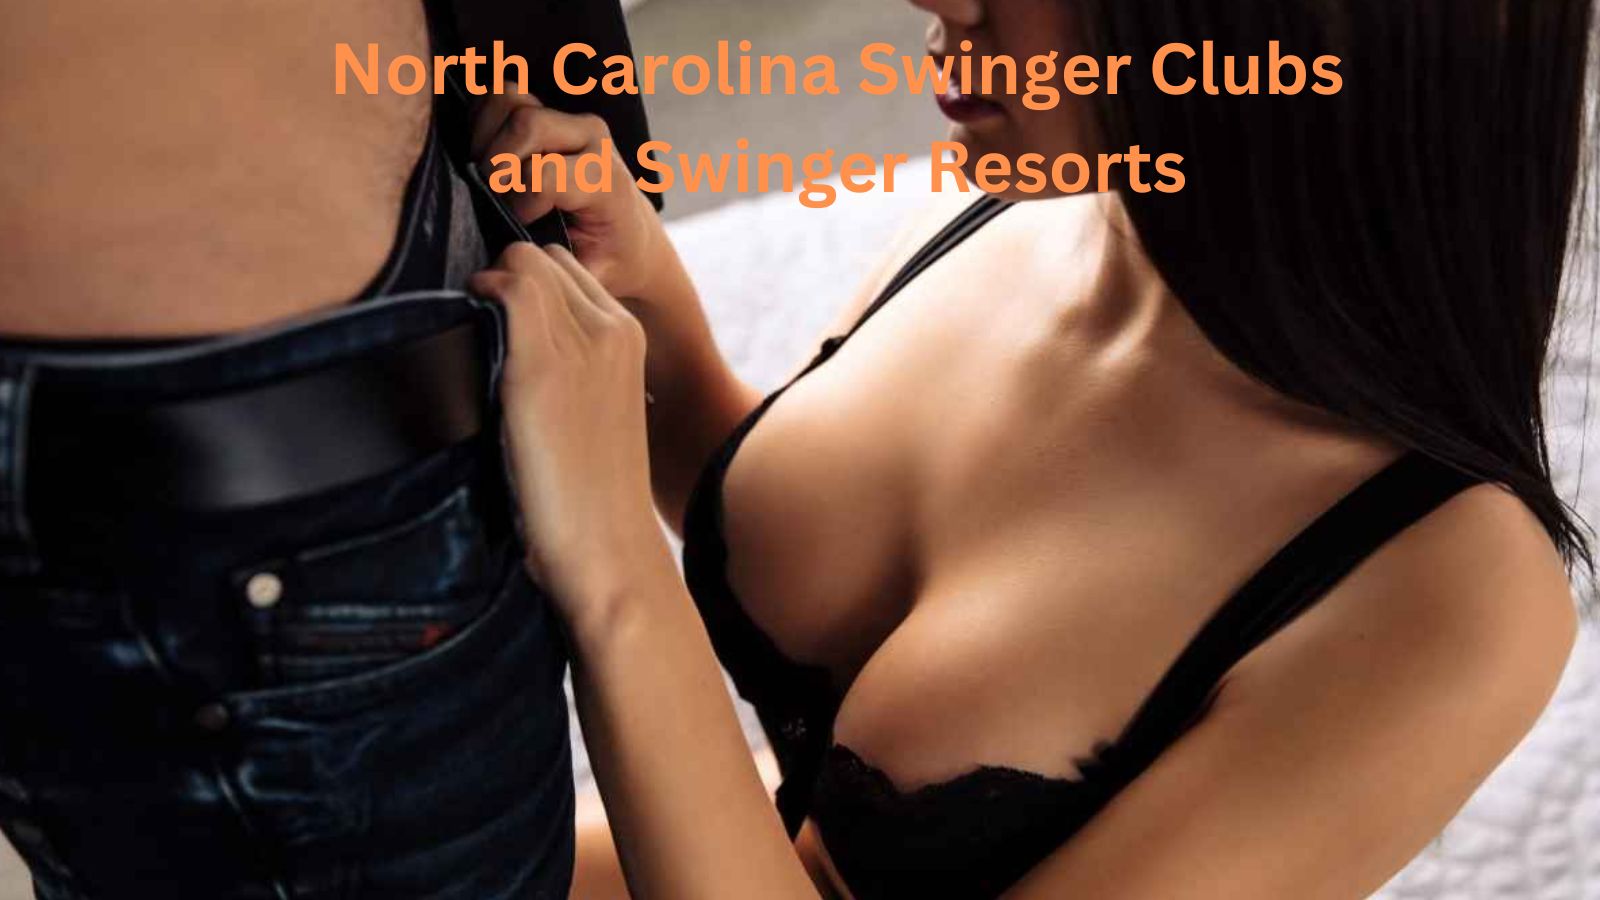 Hotmail Groups Nude - 2023 North Carolina Swinger Clubs and Resorts: Top fun swinger spots